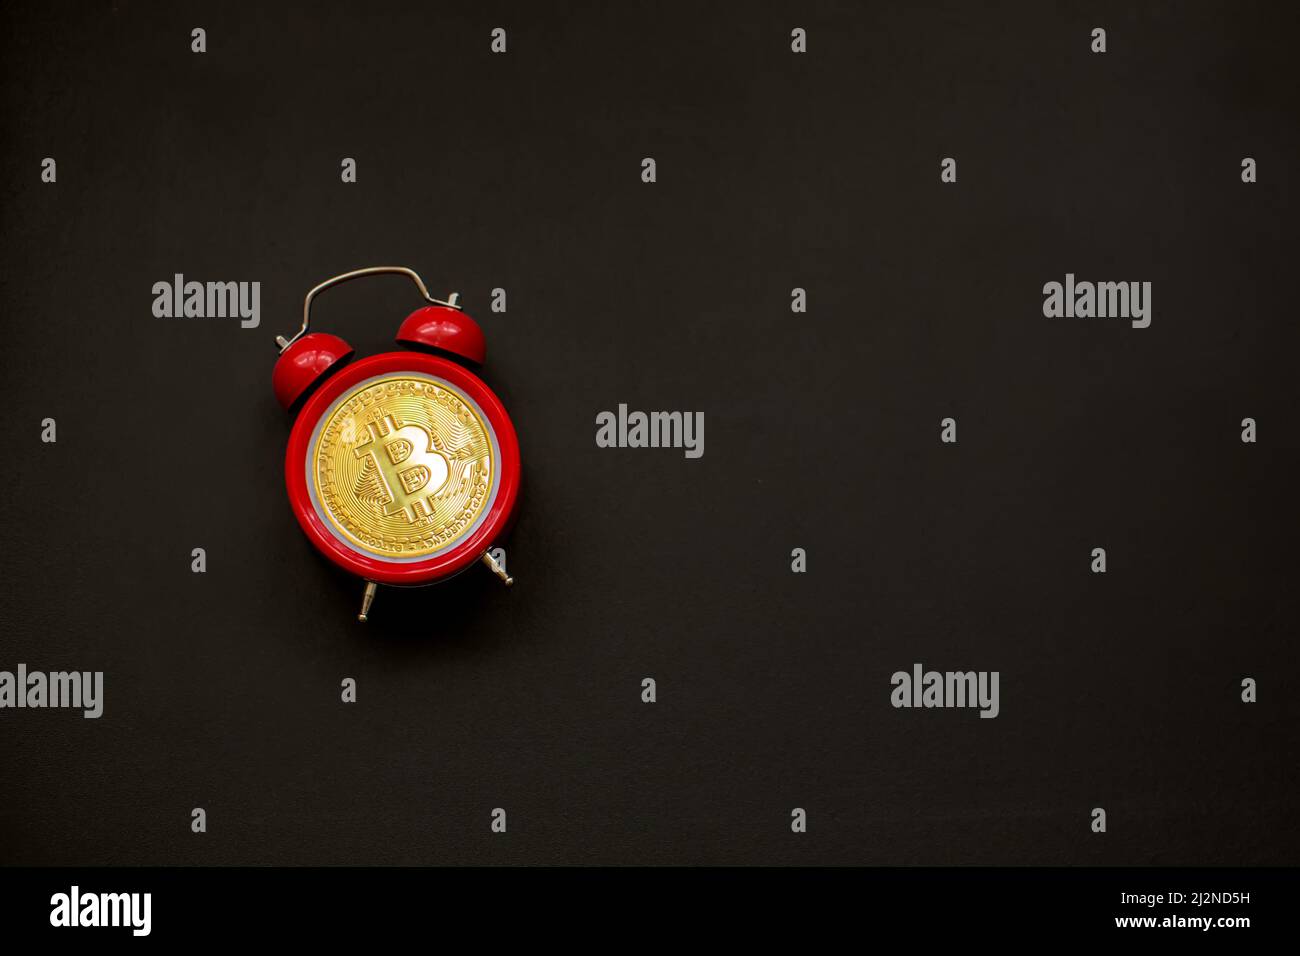 Bitcoin and alarm clock. Concept of deadline to invest in bitcoin cryptocurrency. Stock Photo